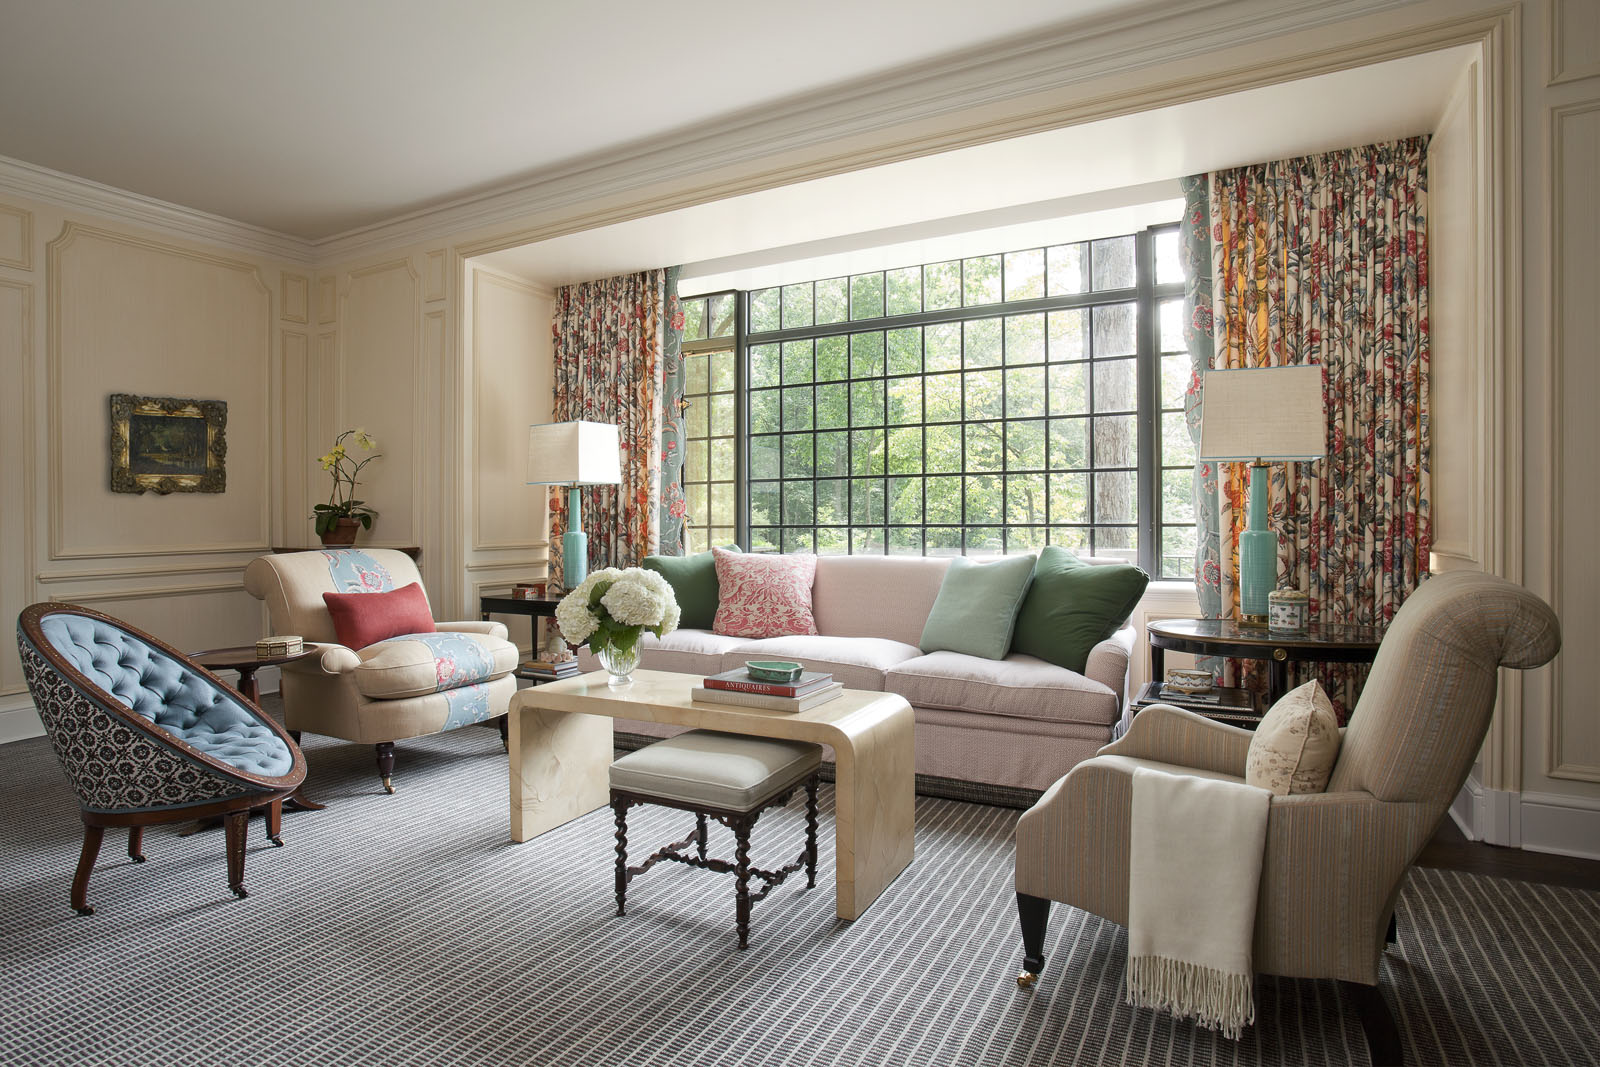  Isbell deconstructed a historic fabric from&nbsp;  Brunschwig &amp; Fils  &nbsp;and used sections to create the living room’s curtains and the appliqué detail on two chairs. The custom-made sofa is covered in a&nbsp;  Bennison  &nbsp;fabric and topp